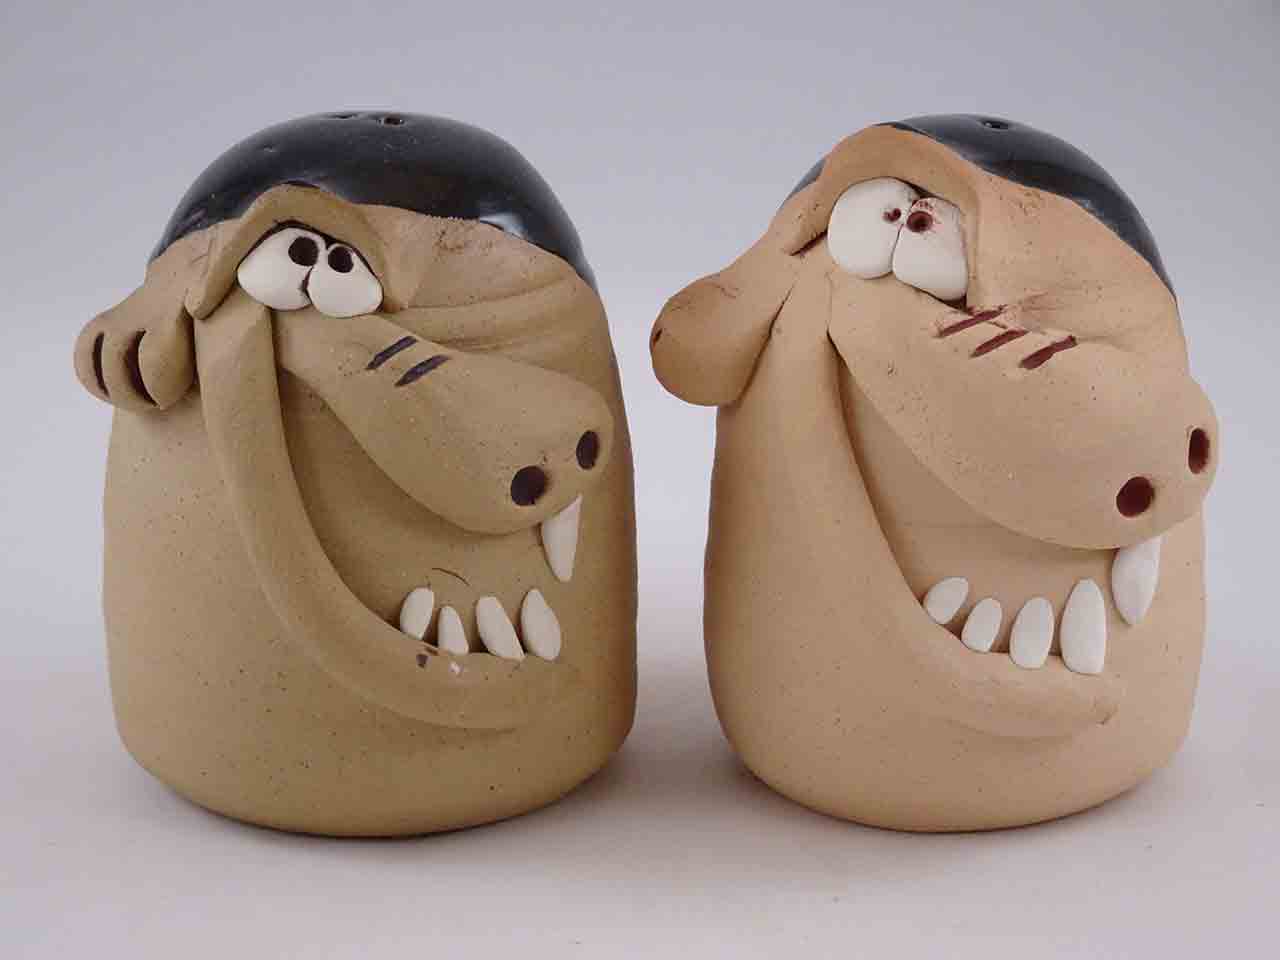 Pretty Ugly Pottery from Wales salt and pepper shakers - alligators